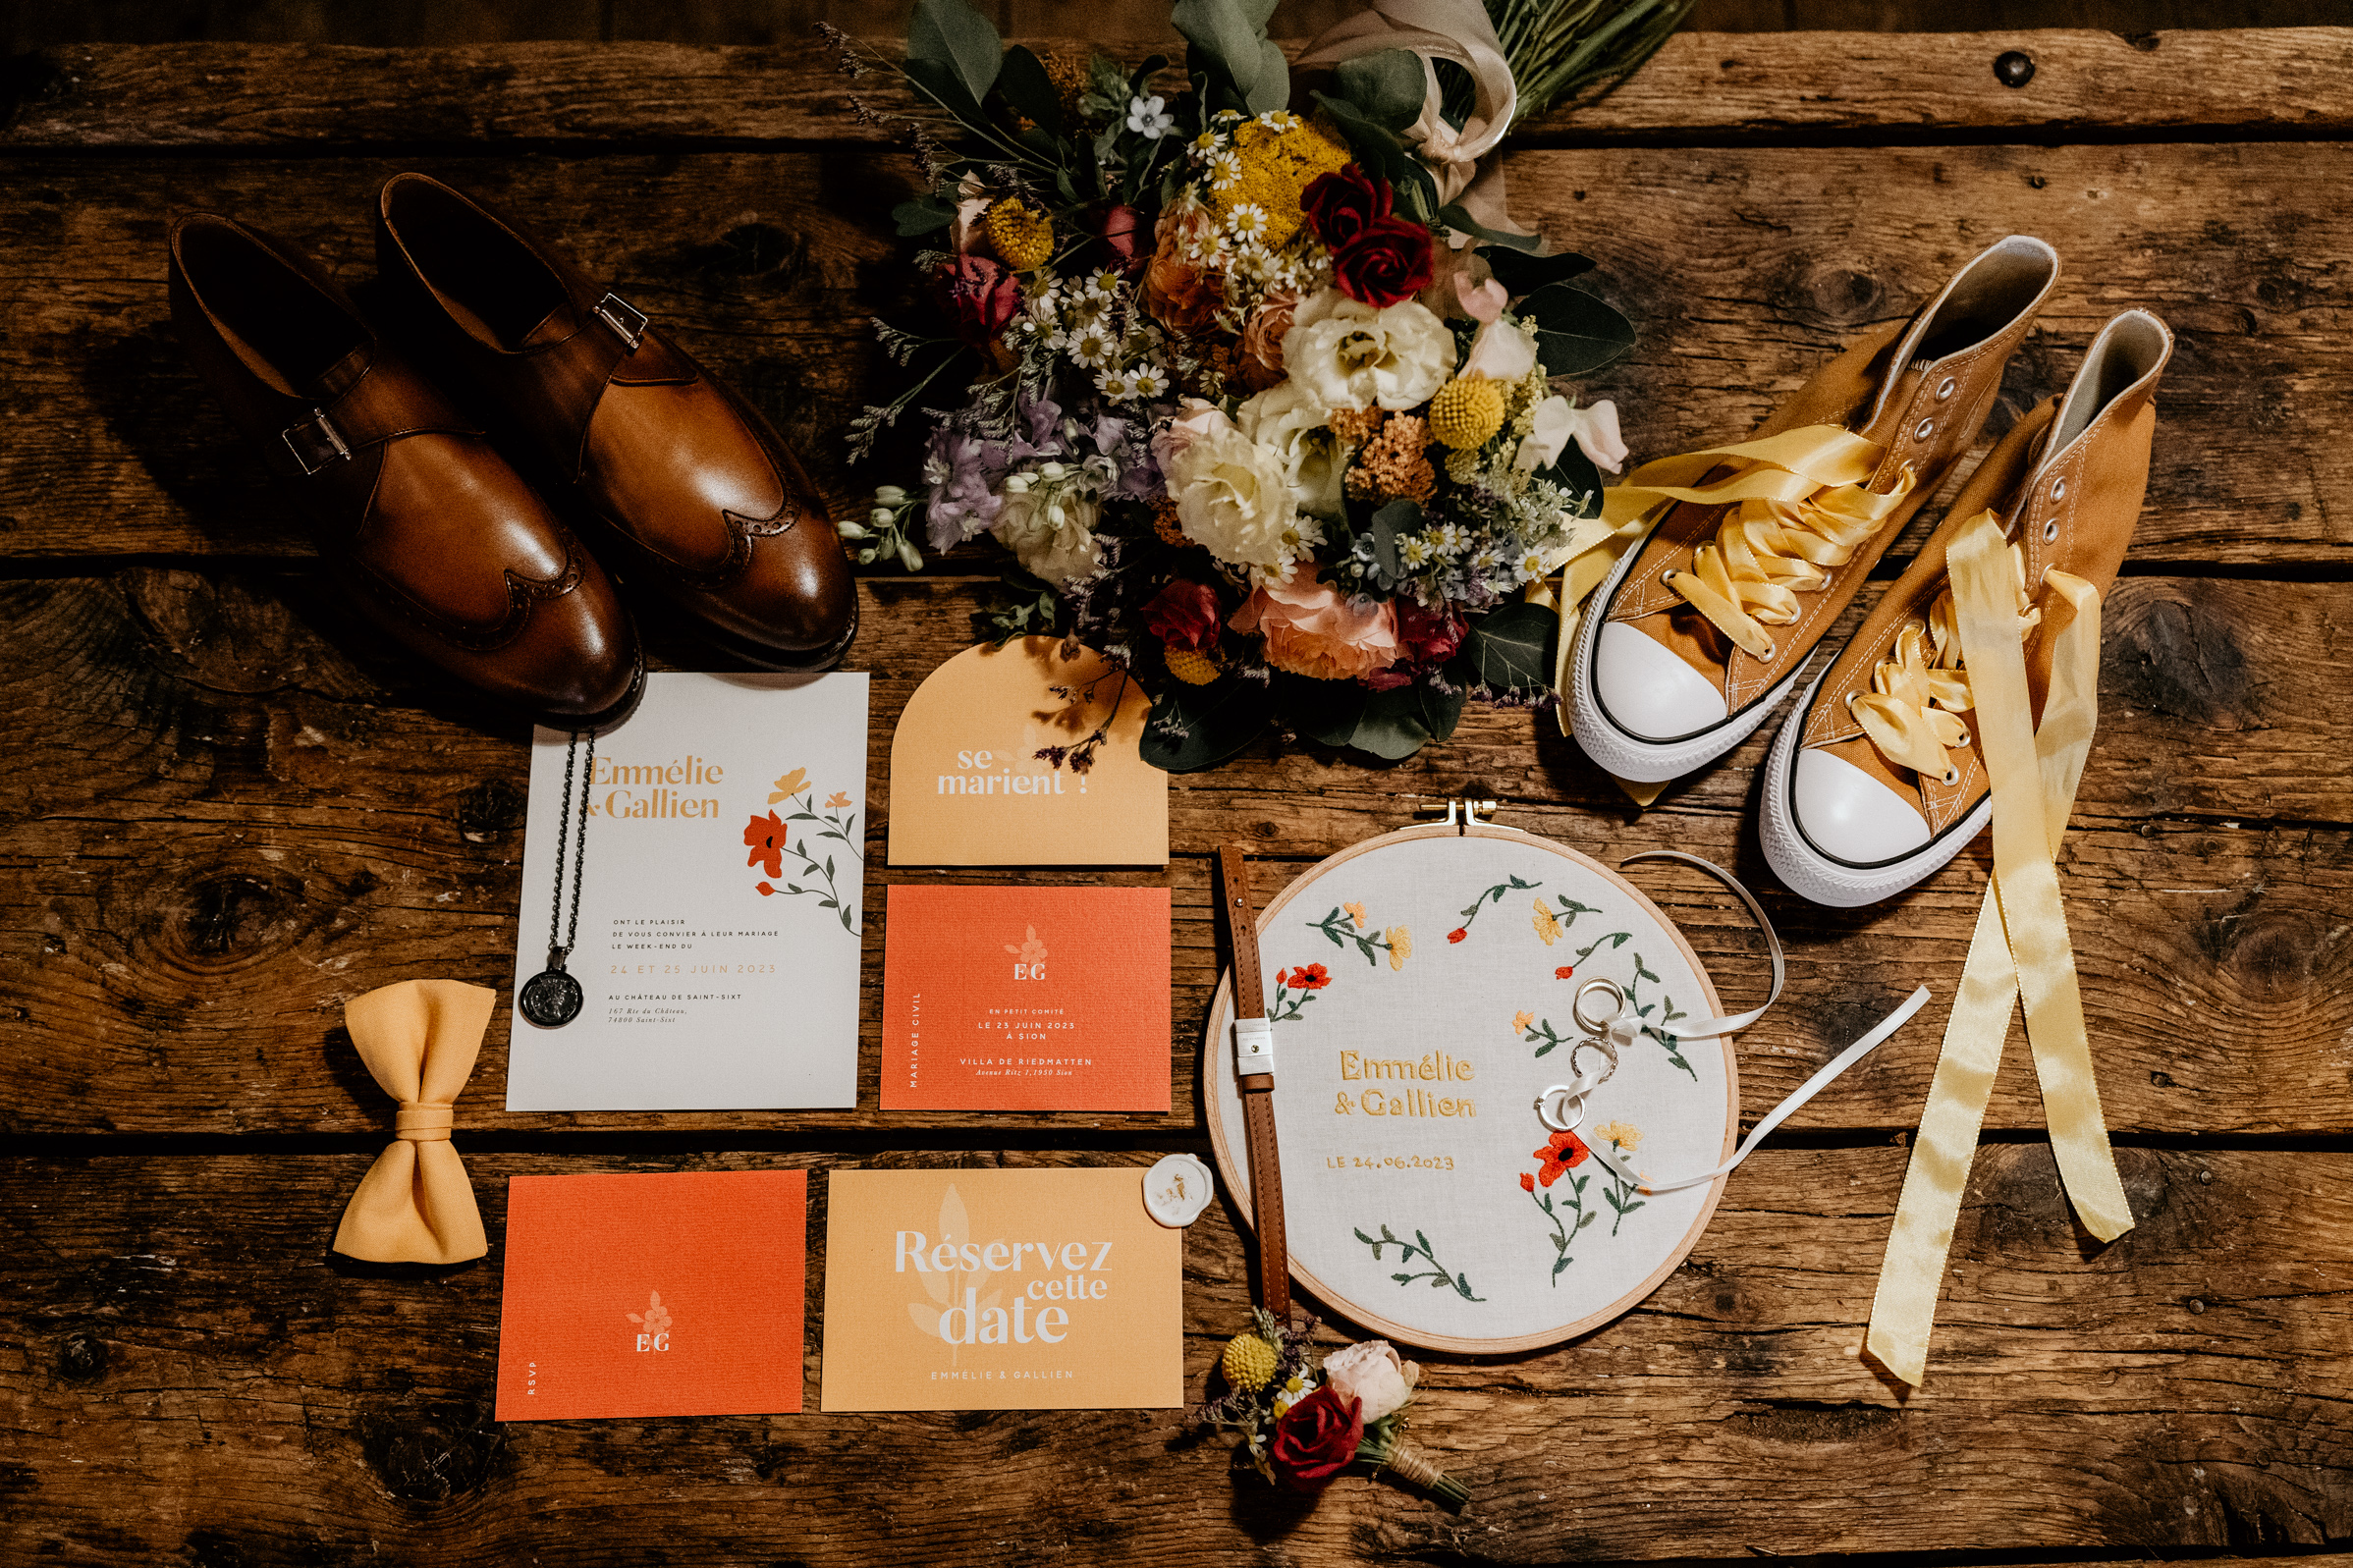 Flat lay, jaune, chaussure de mariage, chaussure de mariée, faire-part, mariage jaune, mariage jaune d'or, mariage or